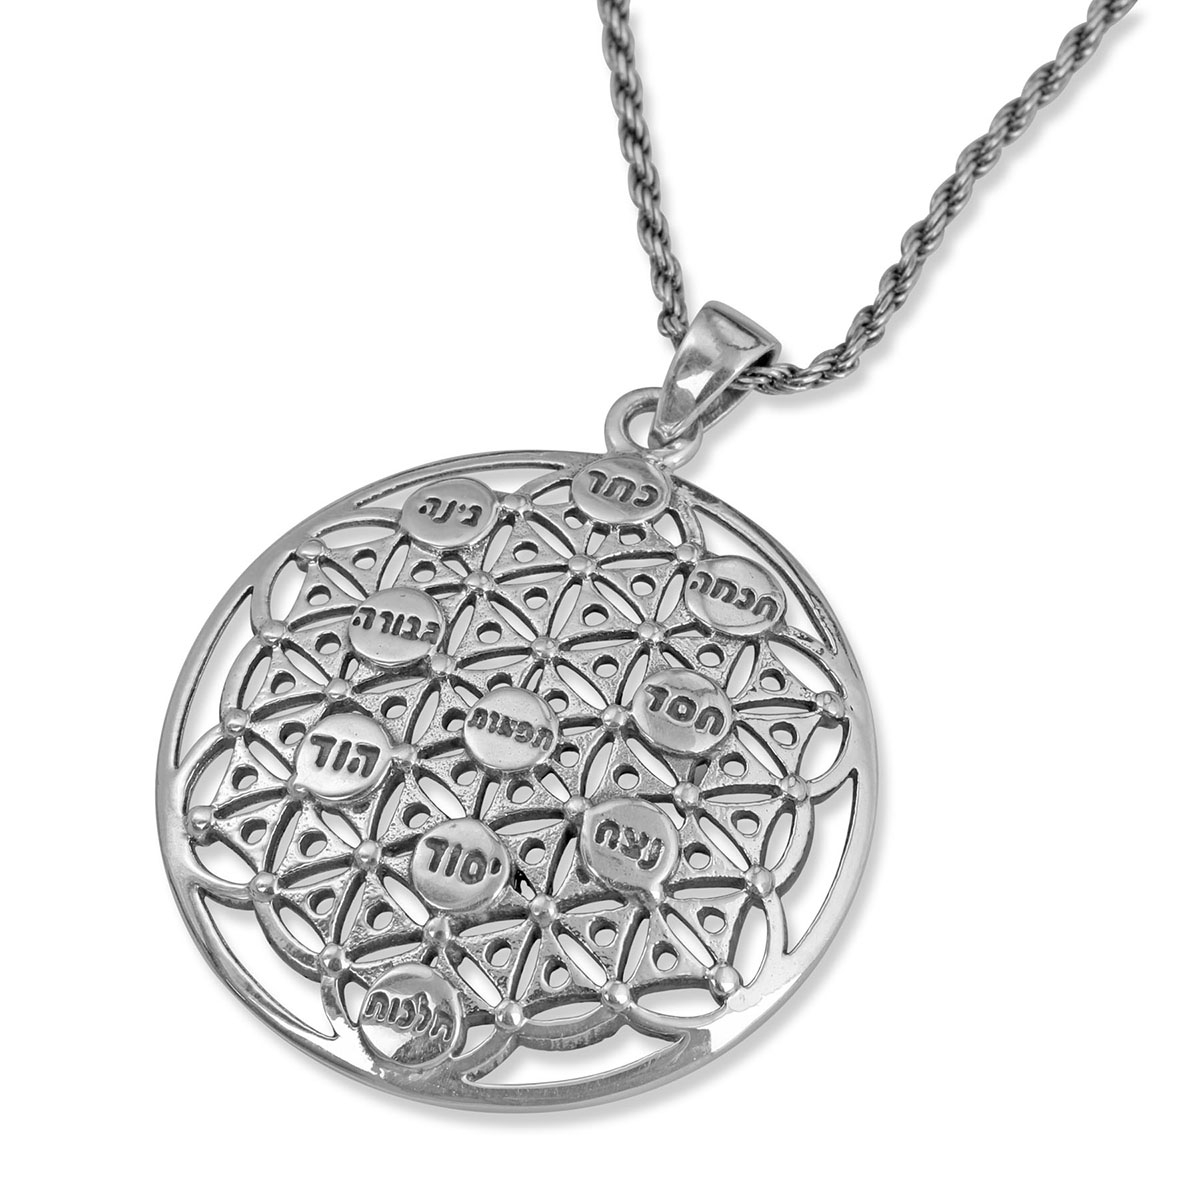 10 Blessings Kabbalah Sterling Silver Necklace - 1